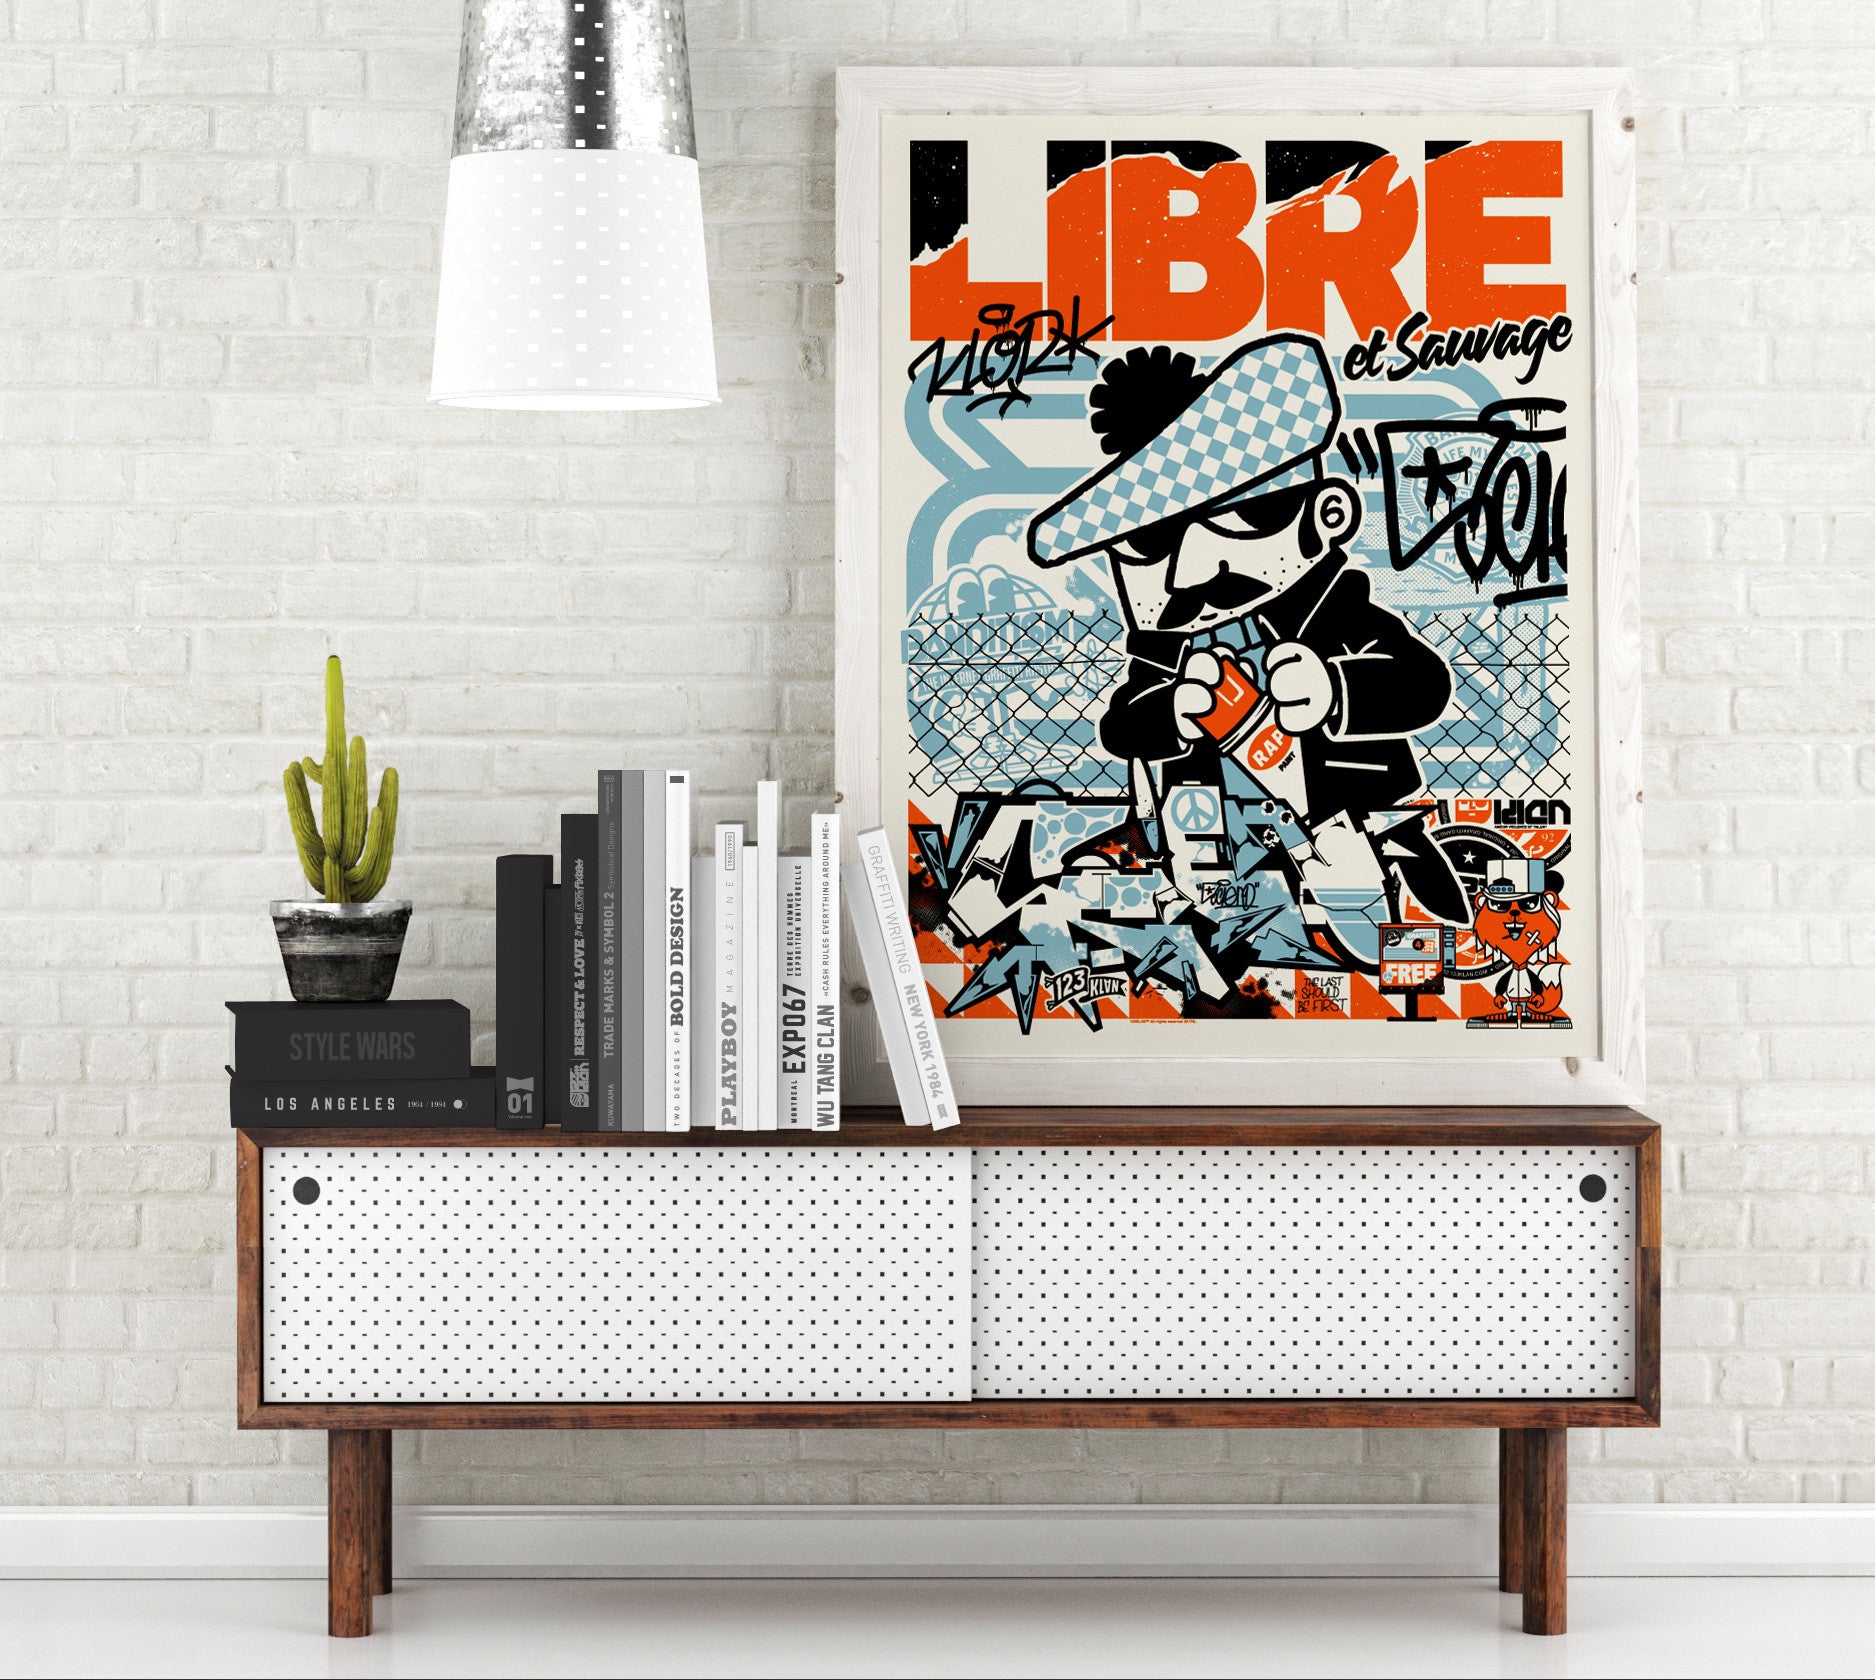 123klan poster libre et sauvage print made in usa 